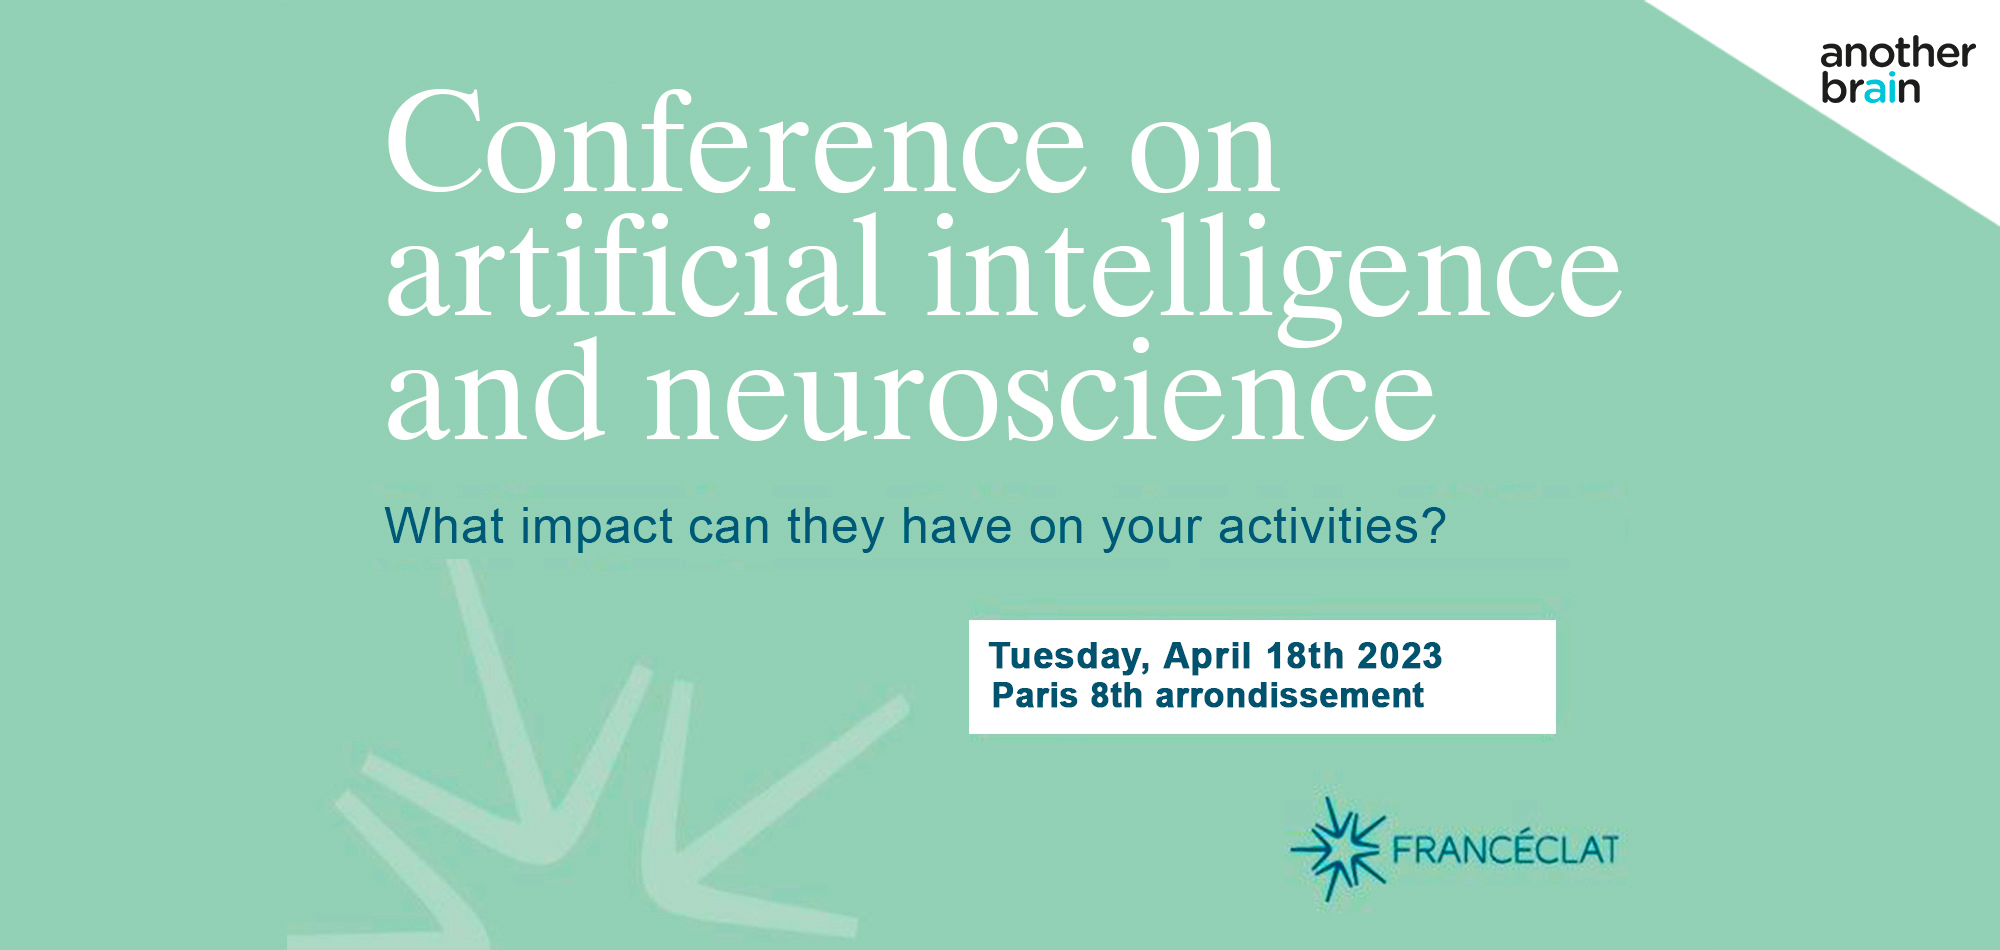 News Conference of Francéclat and AnotherBrain - AnotherBrain